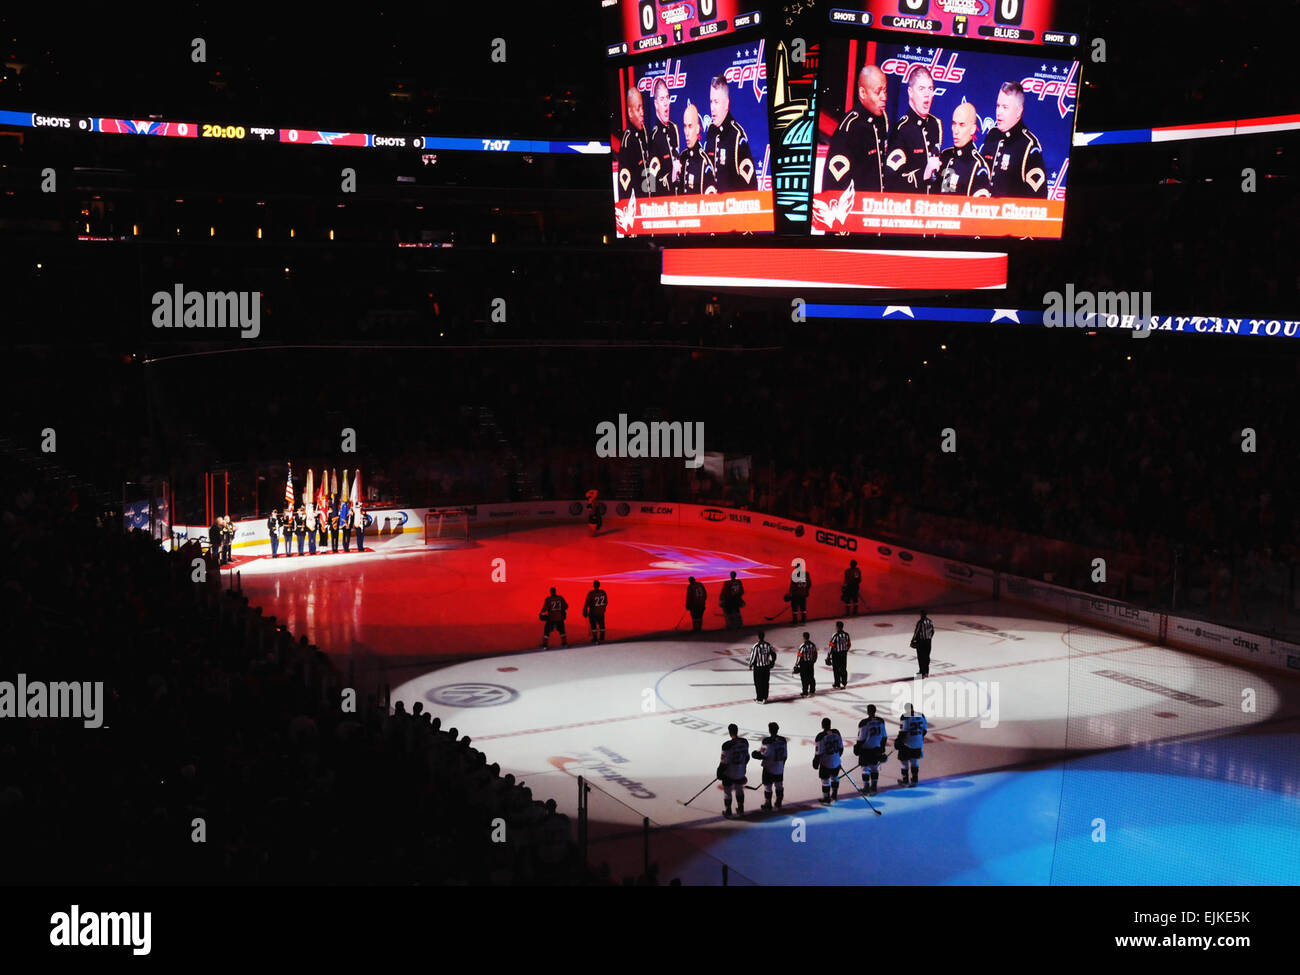 The Joint Armed Forces Color Guard renders honors as the U.S. Army Chorus sings the national anthem before the the start of the Washington Capitals hockey team's 8th Annual Military Appreciation Night, at the Verizon Center in Washington, D.C., March 3, 2011. DOD photo by U.S. Navy Petty Officer 2nd Class William Selby Stock Photo